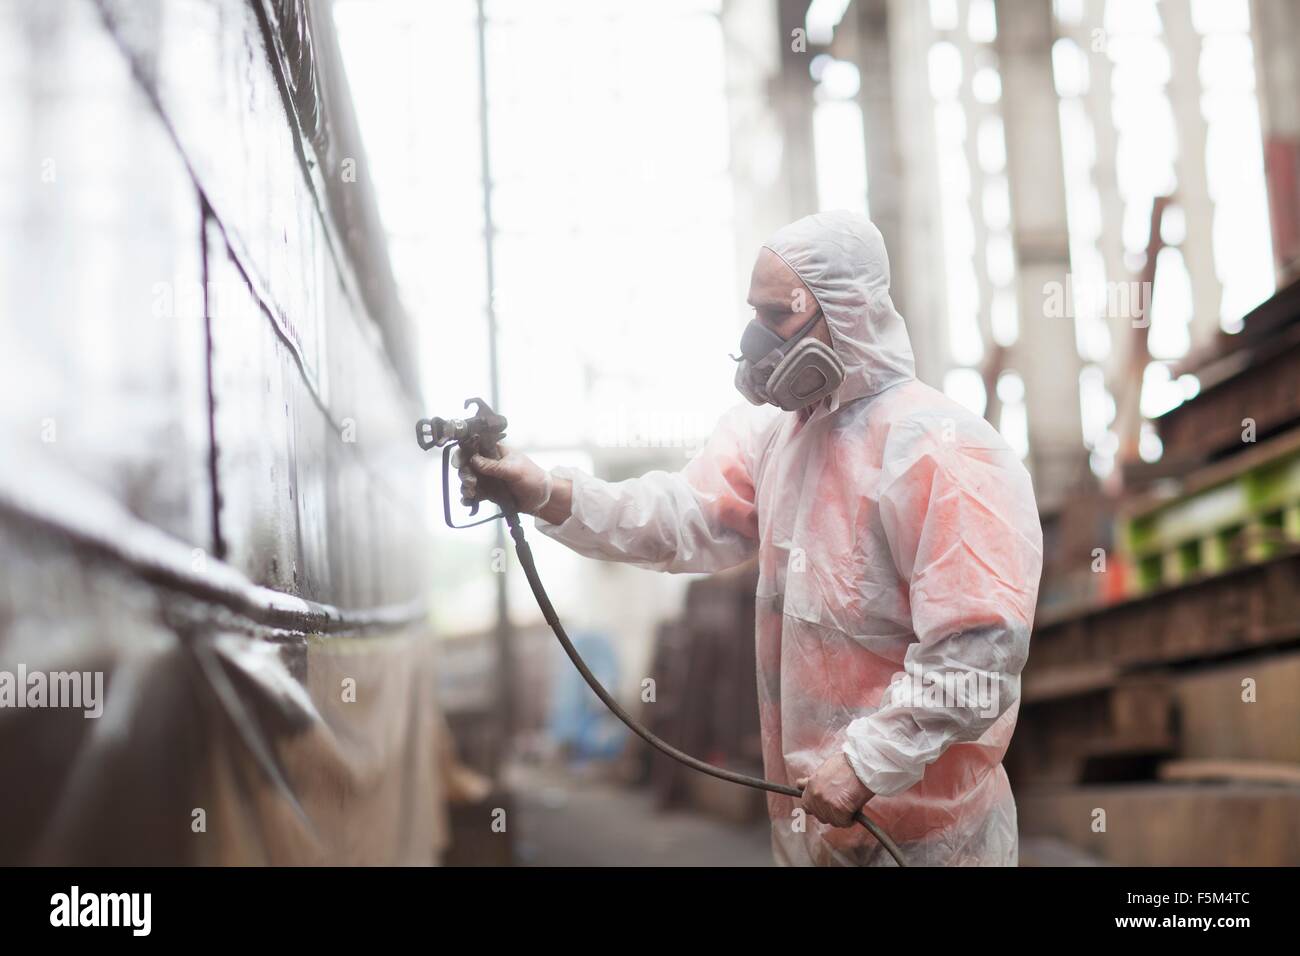 Worker spray painting boat in shipyard Stock Photo